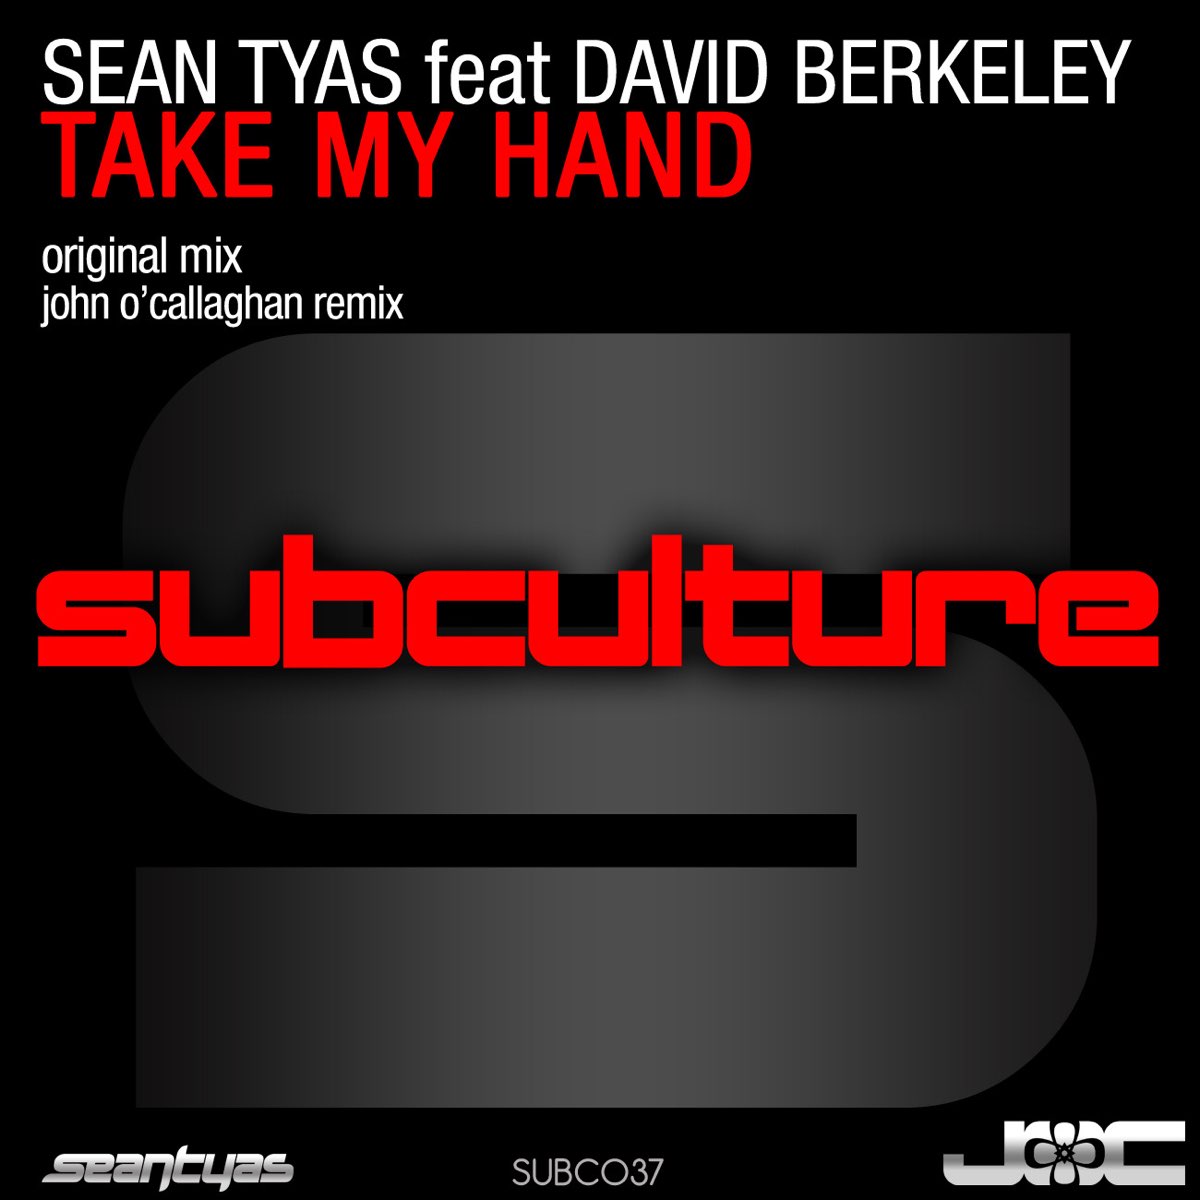 Take My Hand (feat. David Berkeley) - EP by Sean Tyas on Apple Music